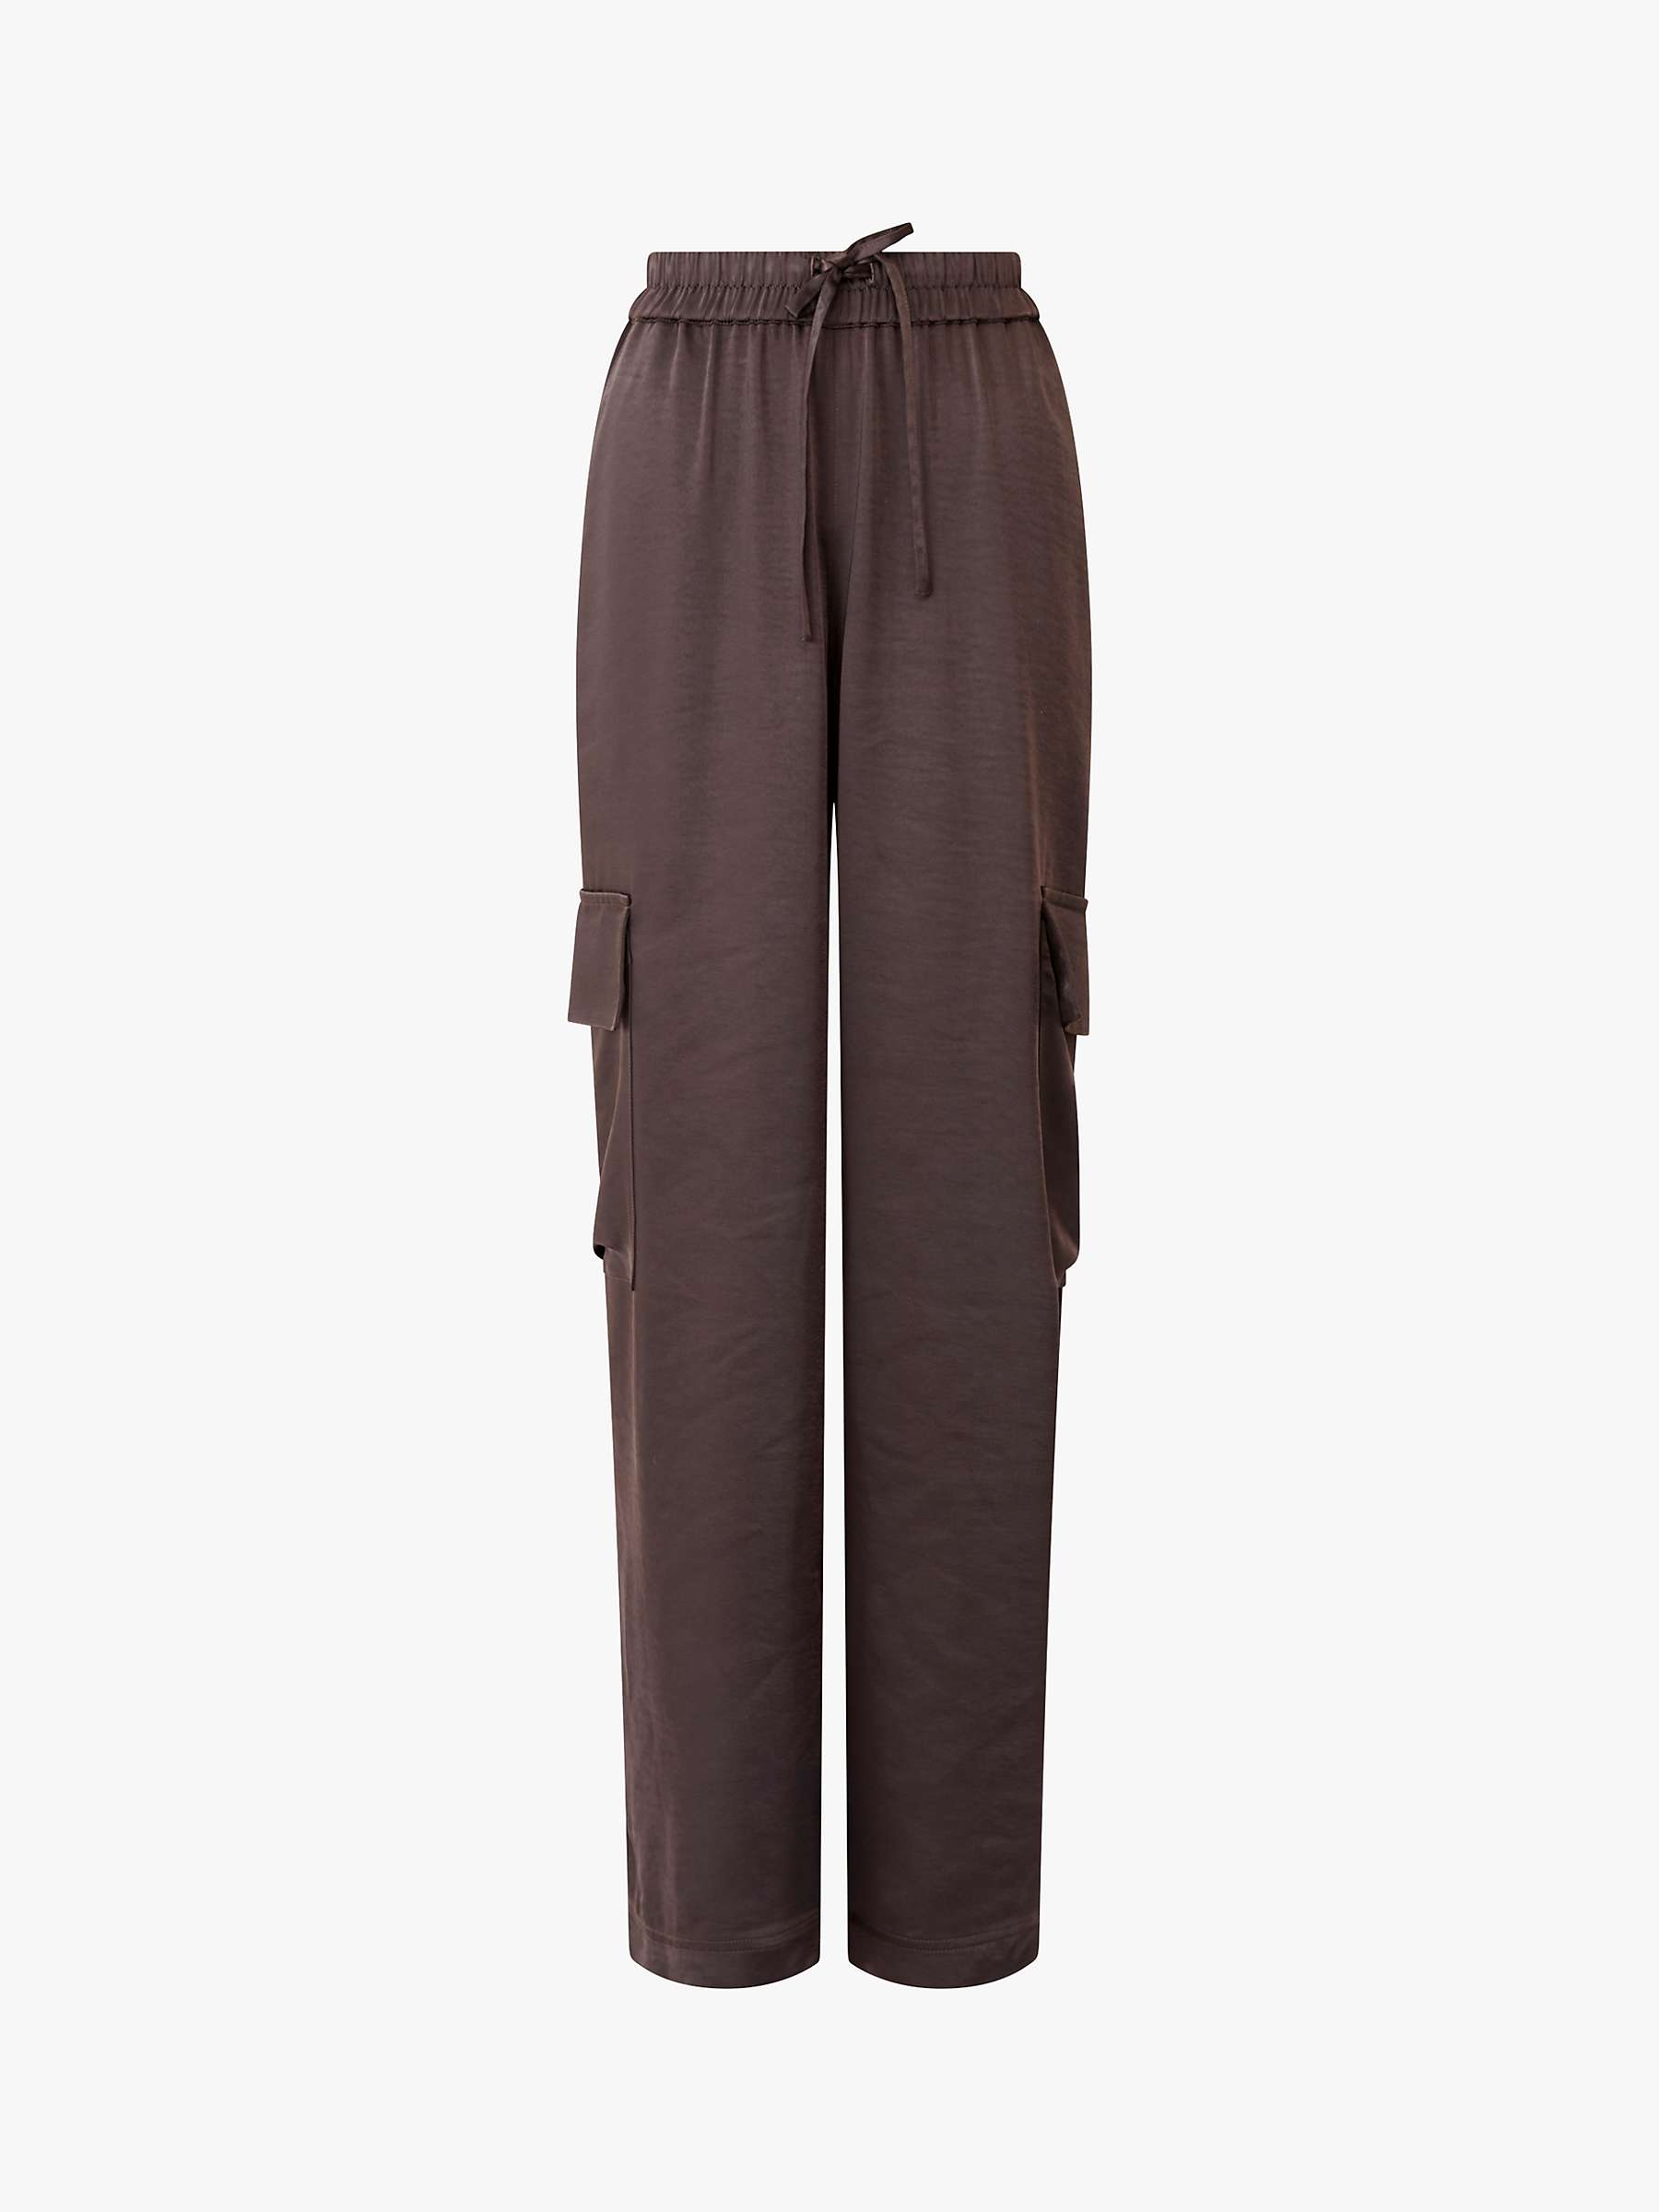 Buy French Connection Chloetta Cargo Trousers Online at johnlewis.com